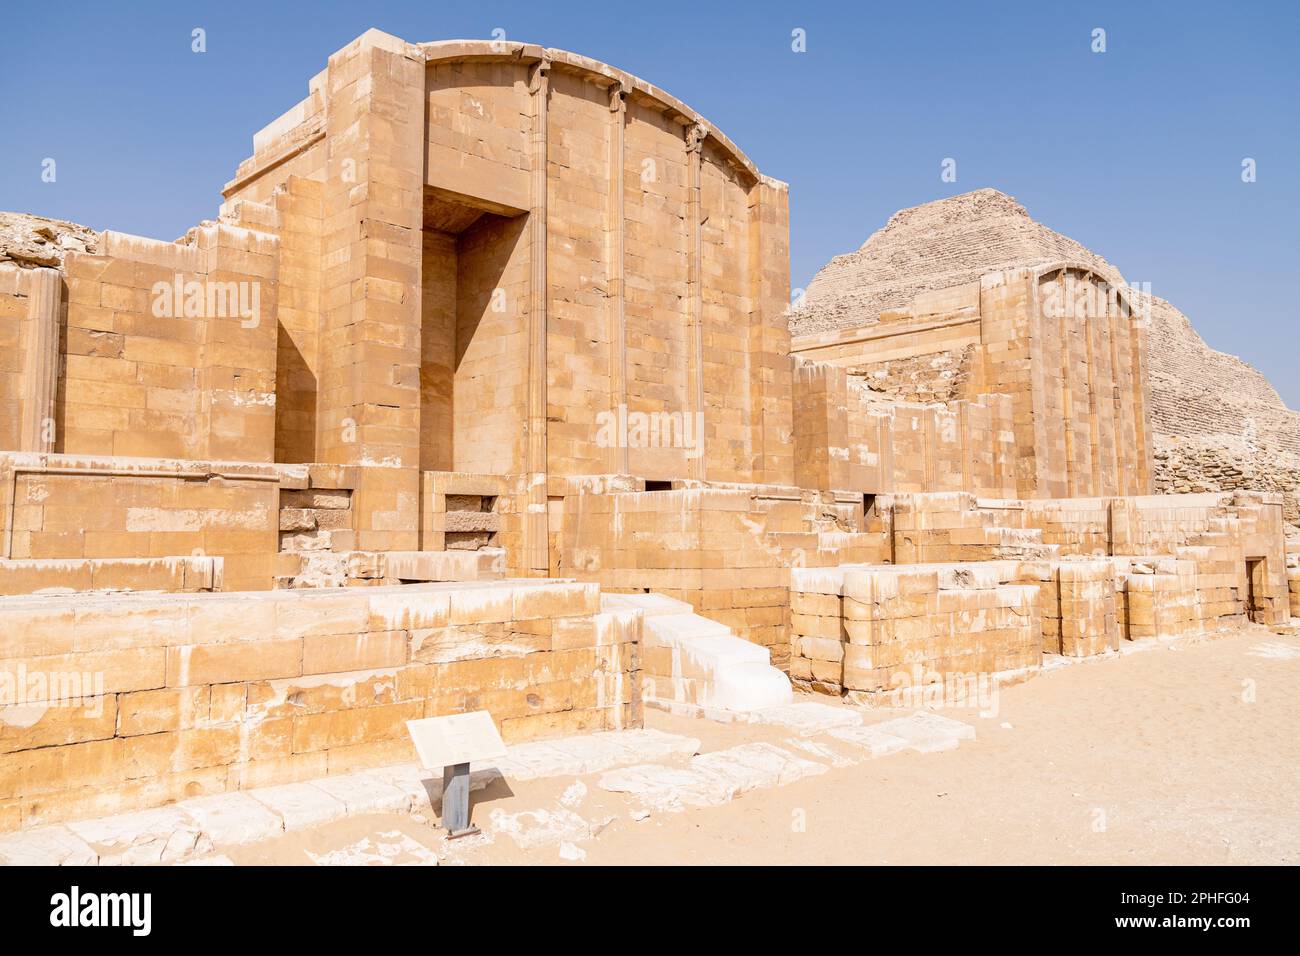 Temple ruins at the Sed Festival complex by the Pyramid of Djoser at the Saqqara Necropolis in Giza, Egypt Stock Photo